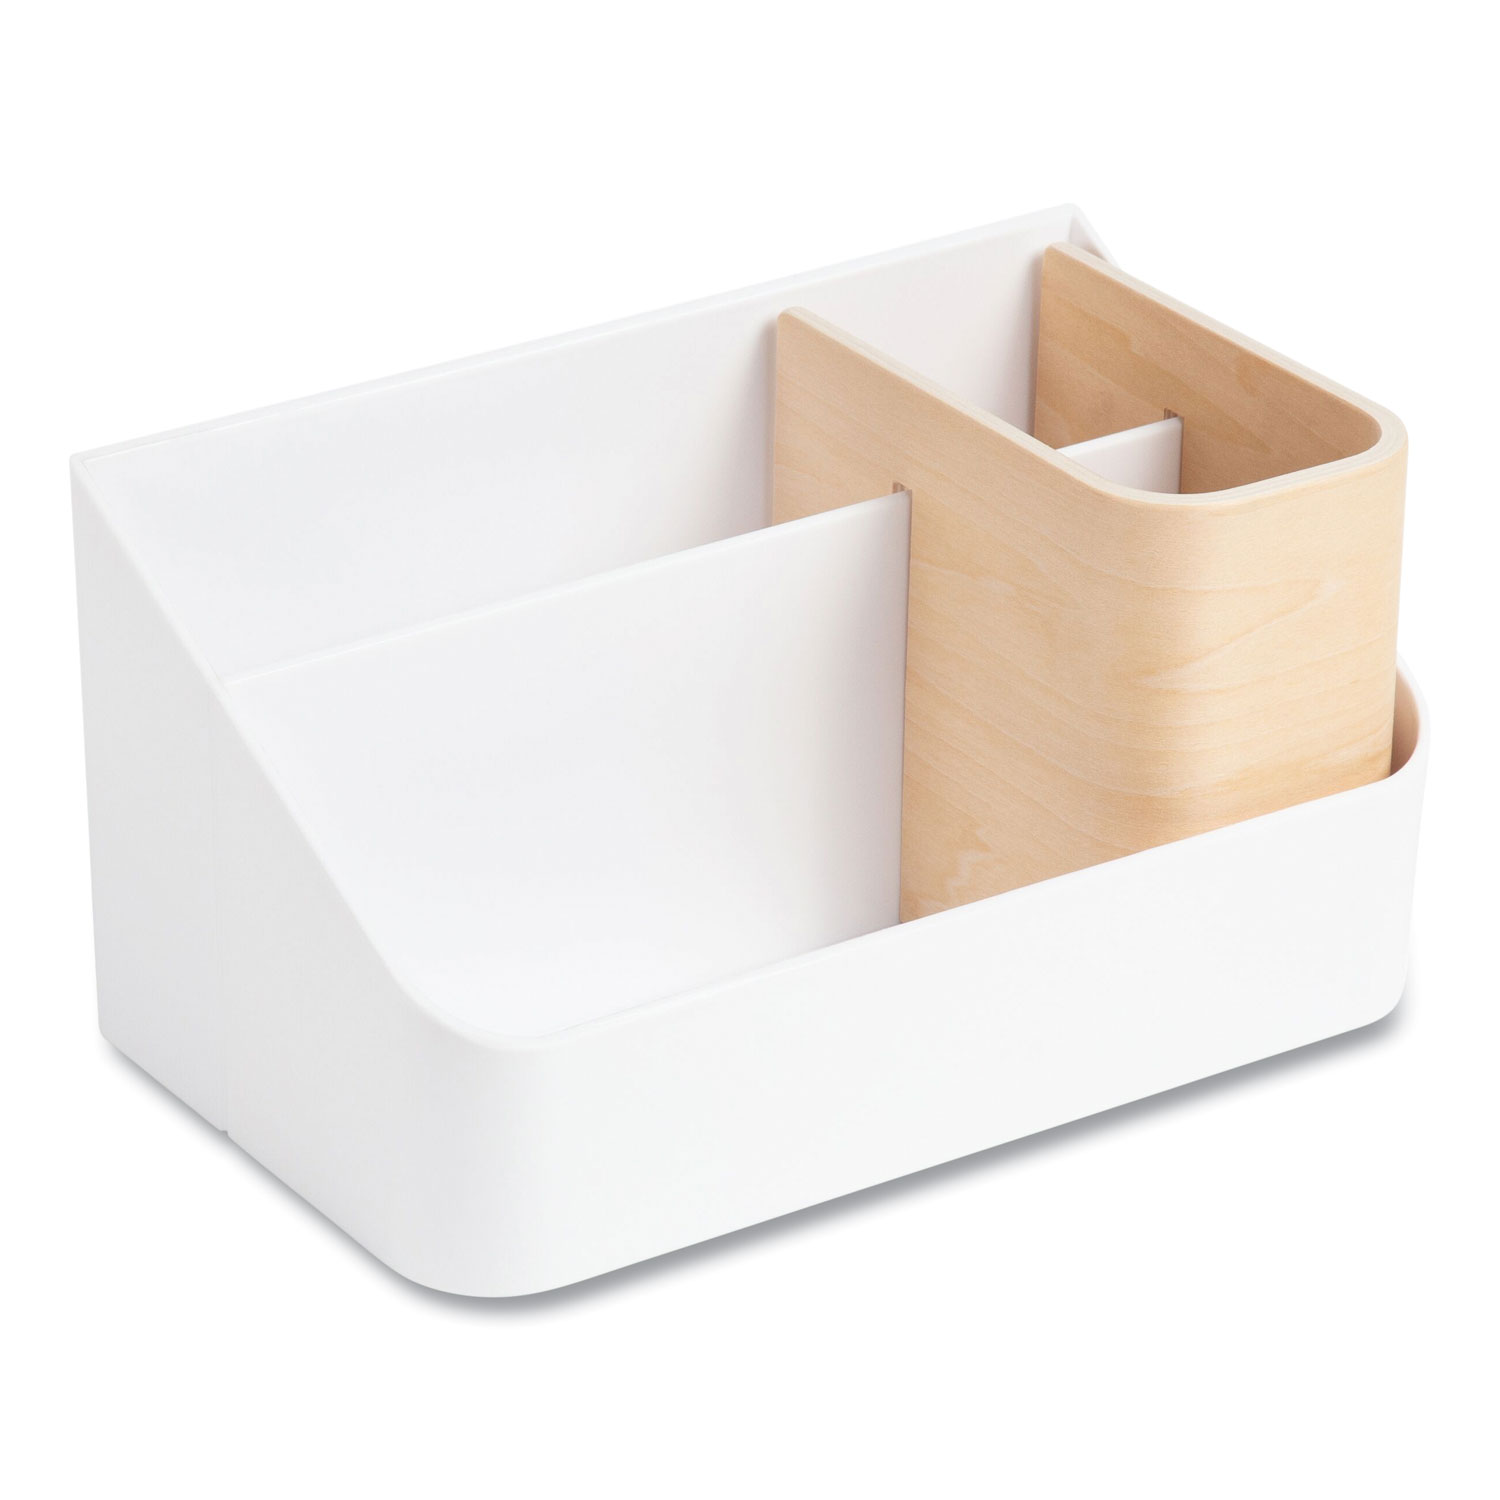 Mod Caddy Desktop Organizer - White with Natural Wood Handle